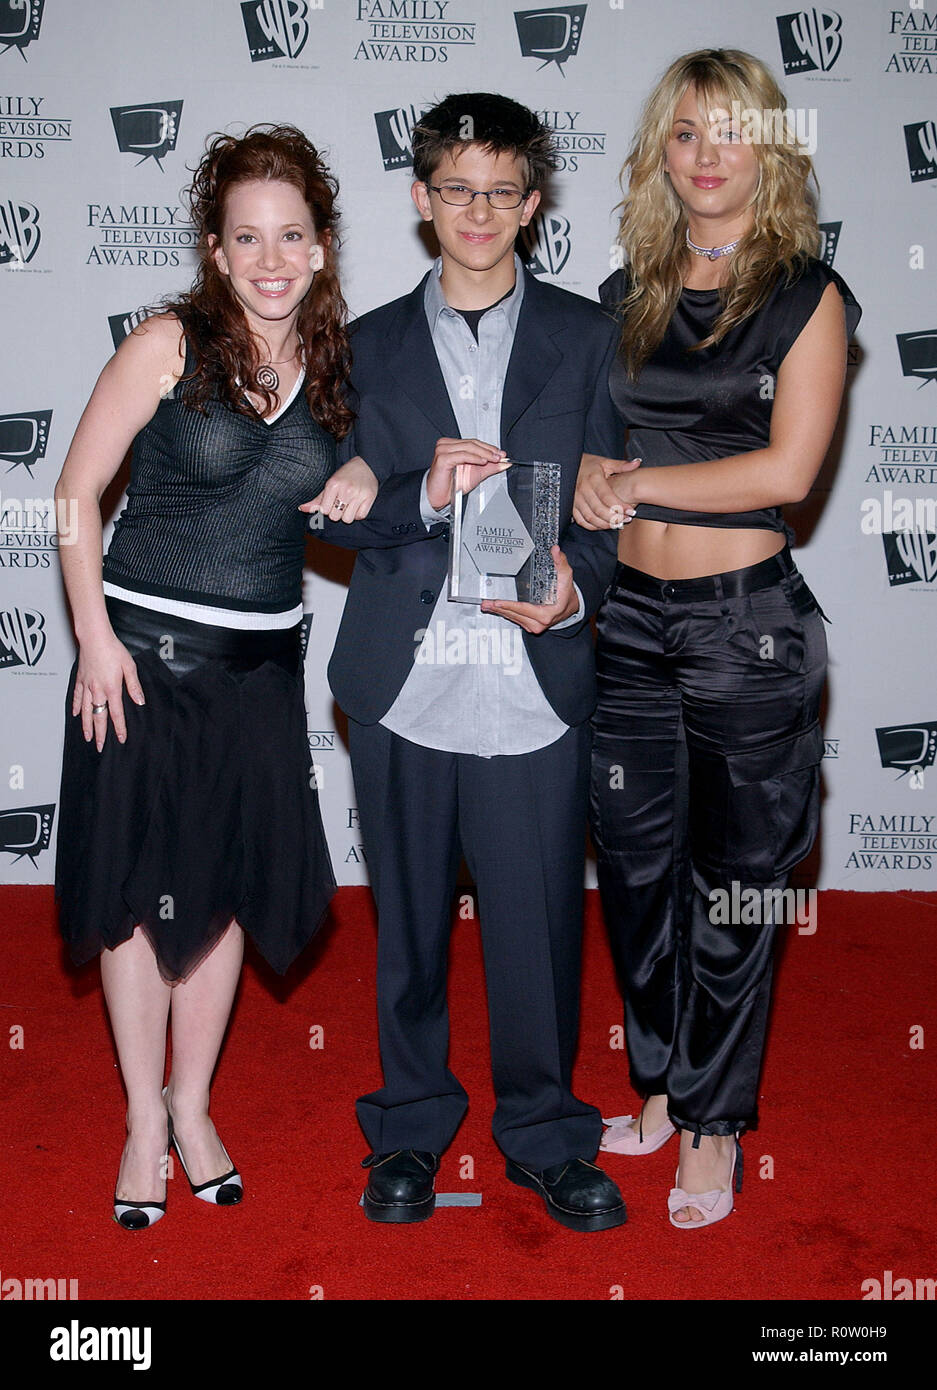 Amy Davidson, Martin Spanjers and Kaley Cuoco at the " 5th Annual Family Television Awards " at the Bever;ly Hilton in Los Angeles. August 14, 2003.   Stock Photo